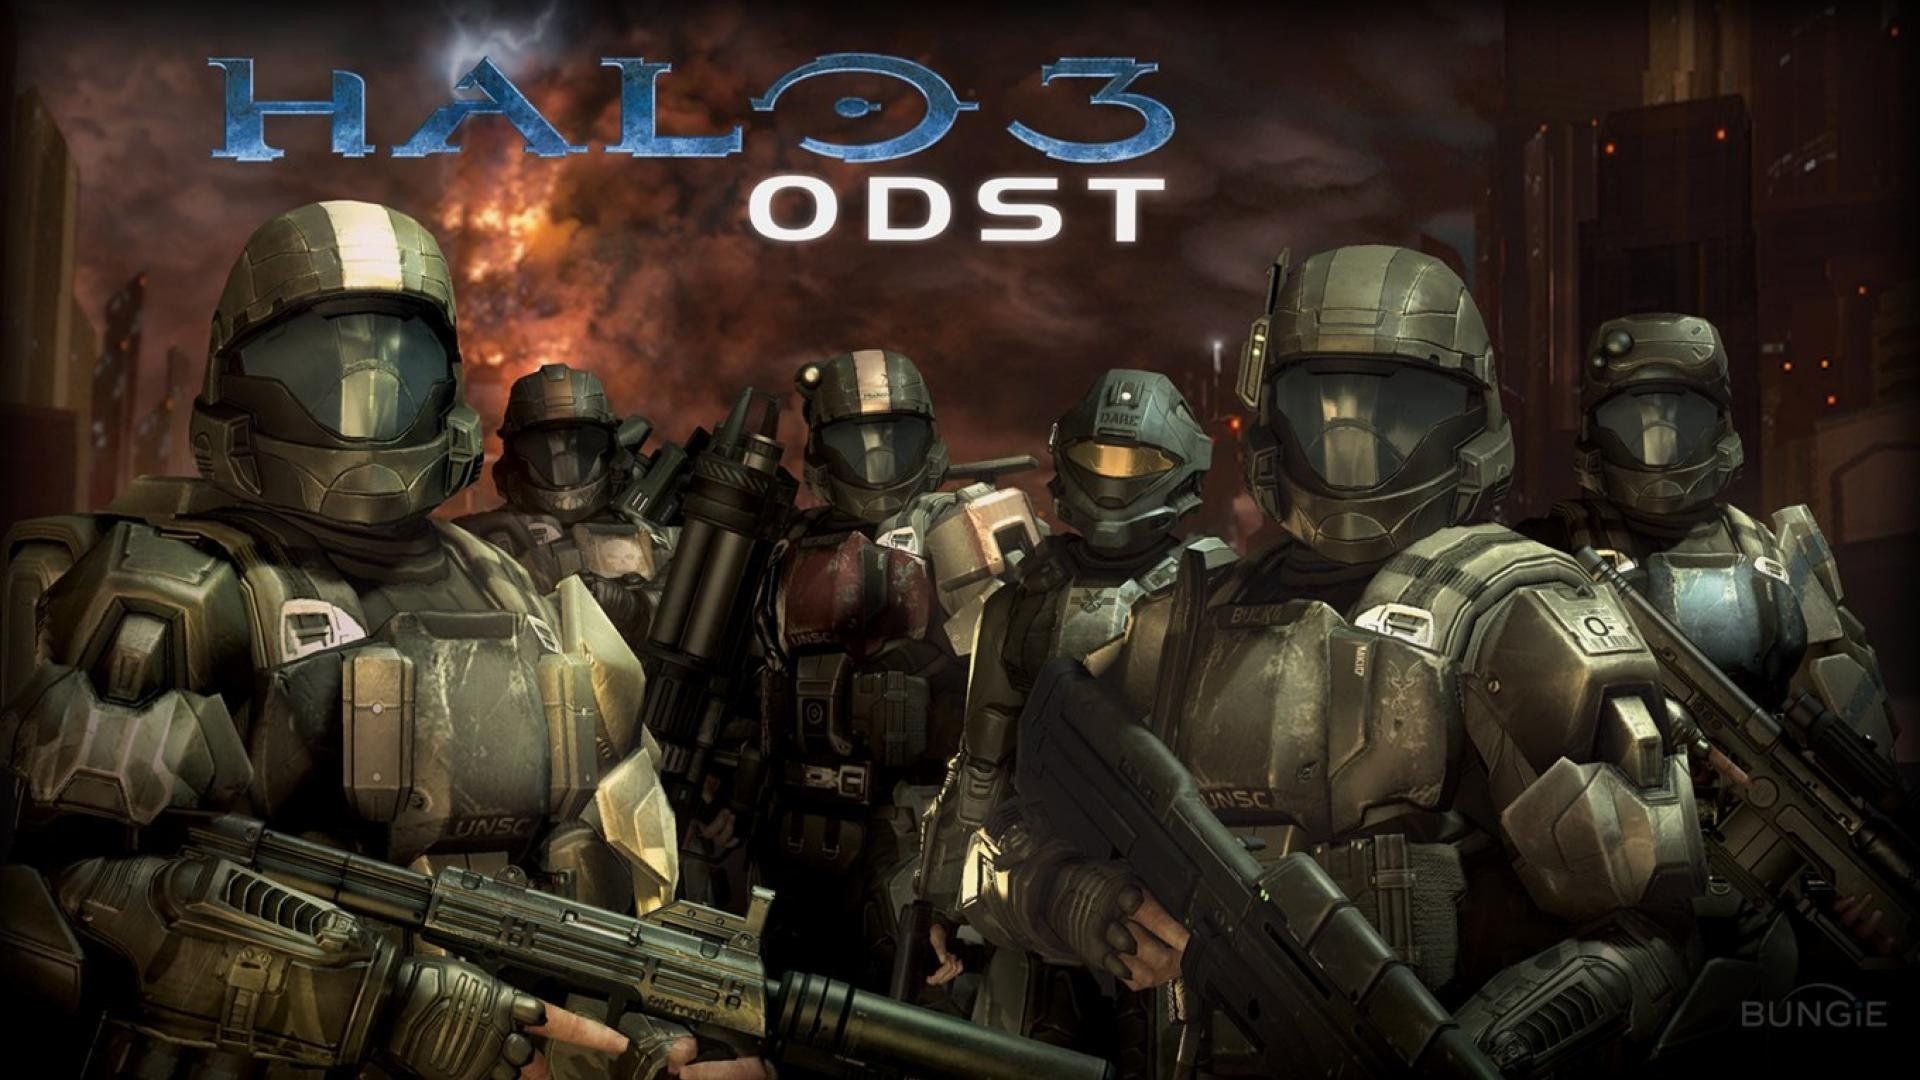 1920x1080 ... Wallpaper Halo 3 Odst Iphone. Download